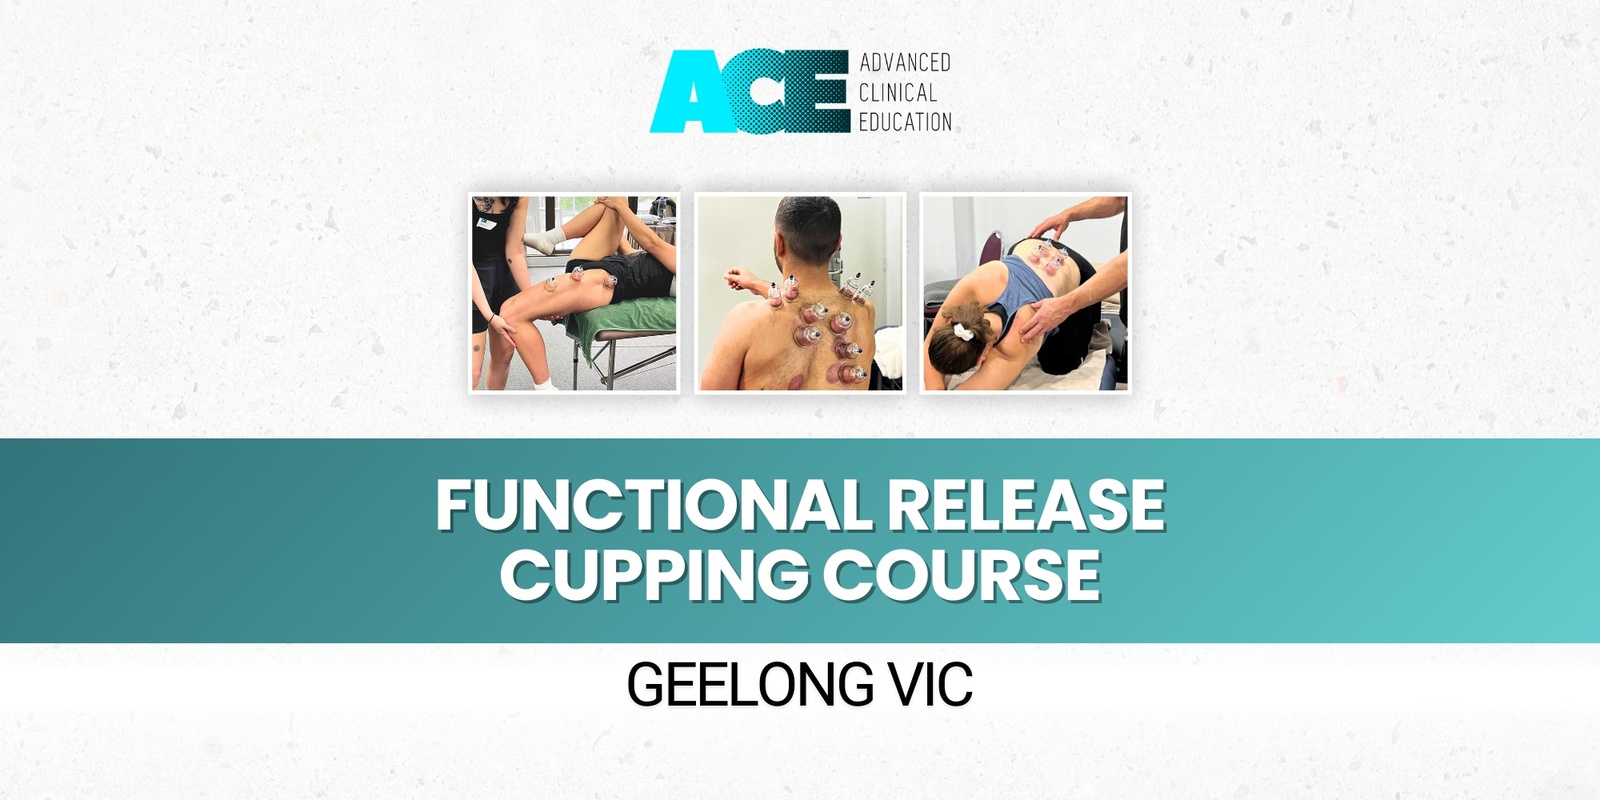 Banner image for Functional Release Cupping Course (Geelong VIC)